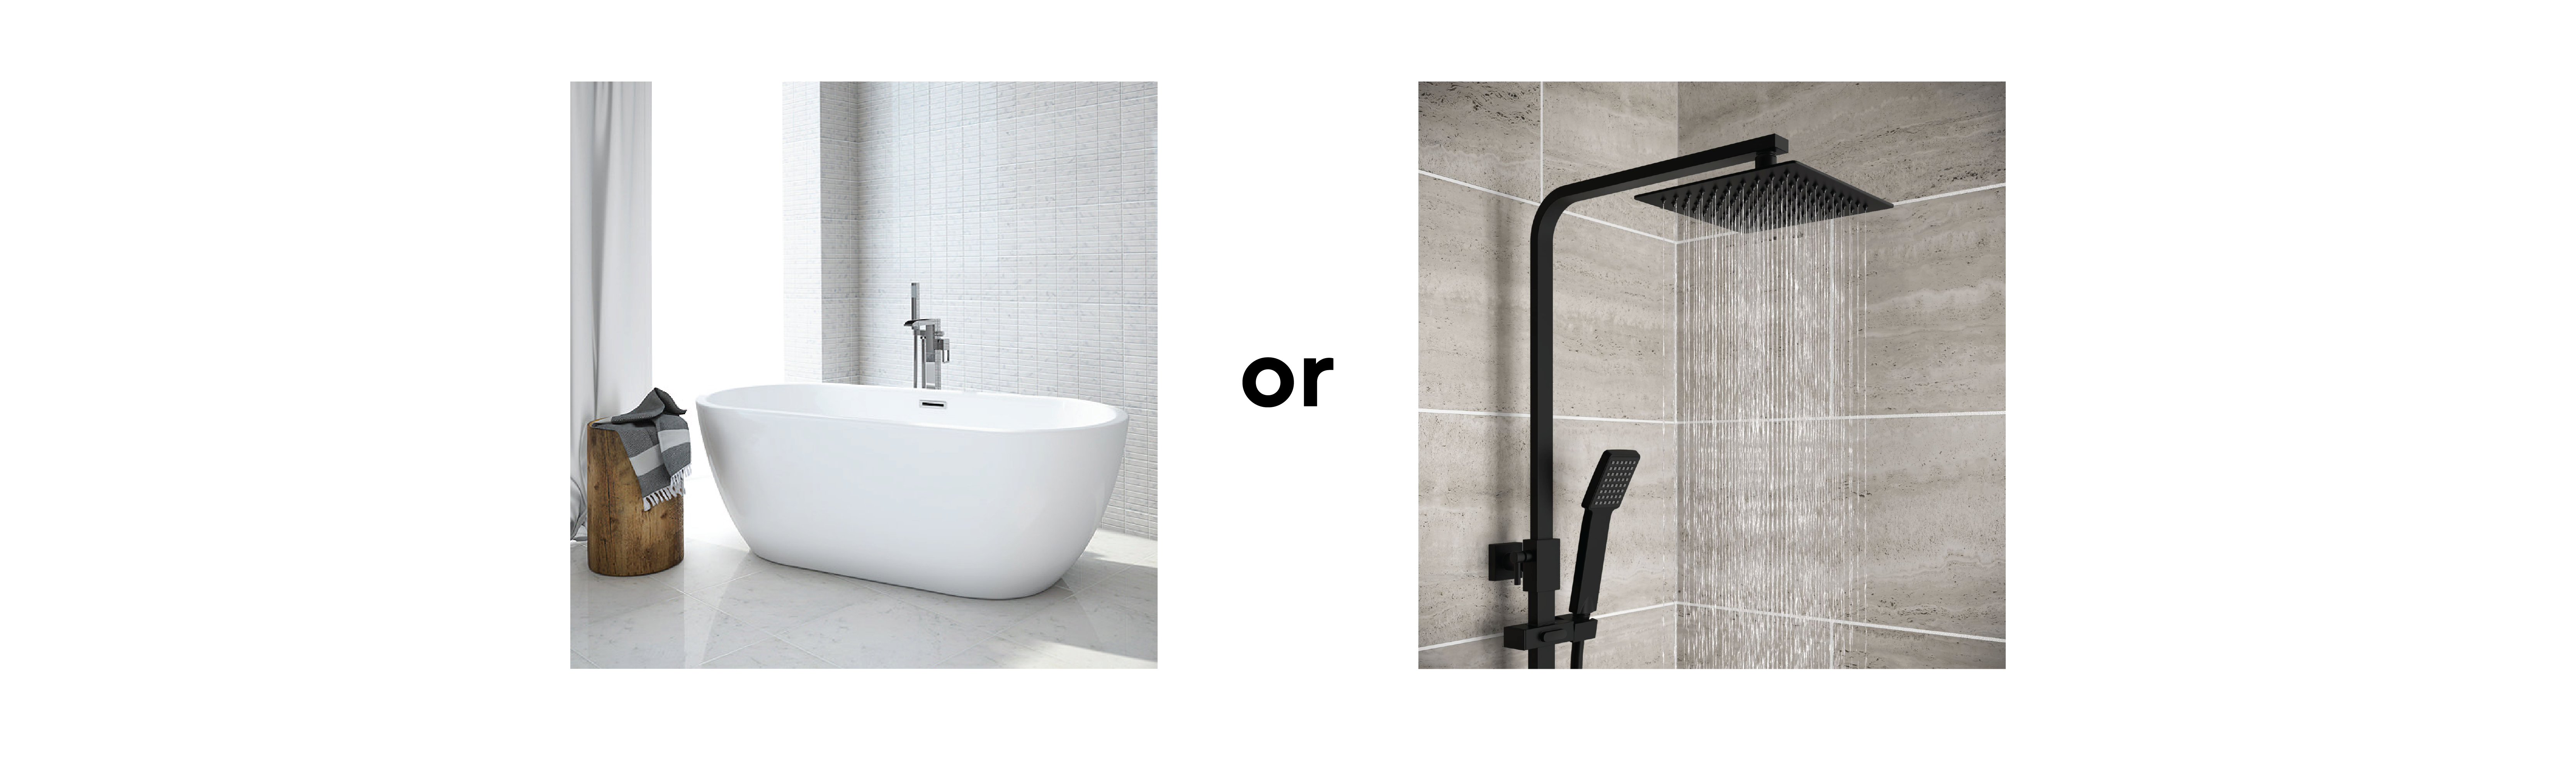 Bath vs Shower, which is more popular in the UK?